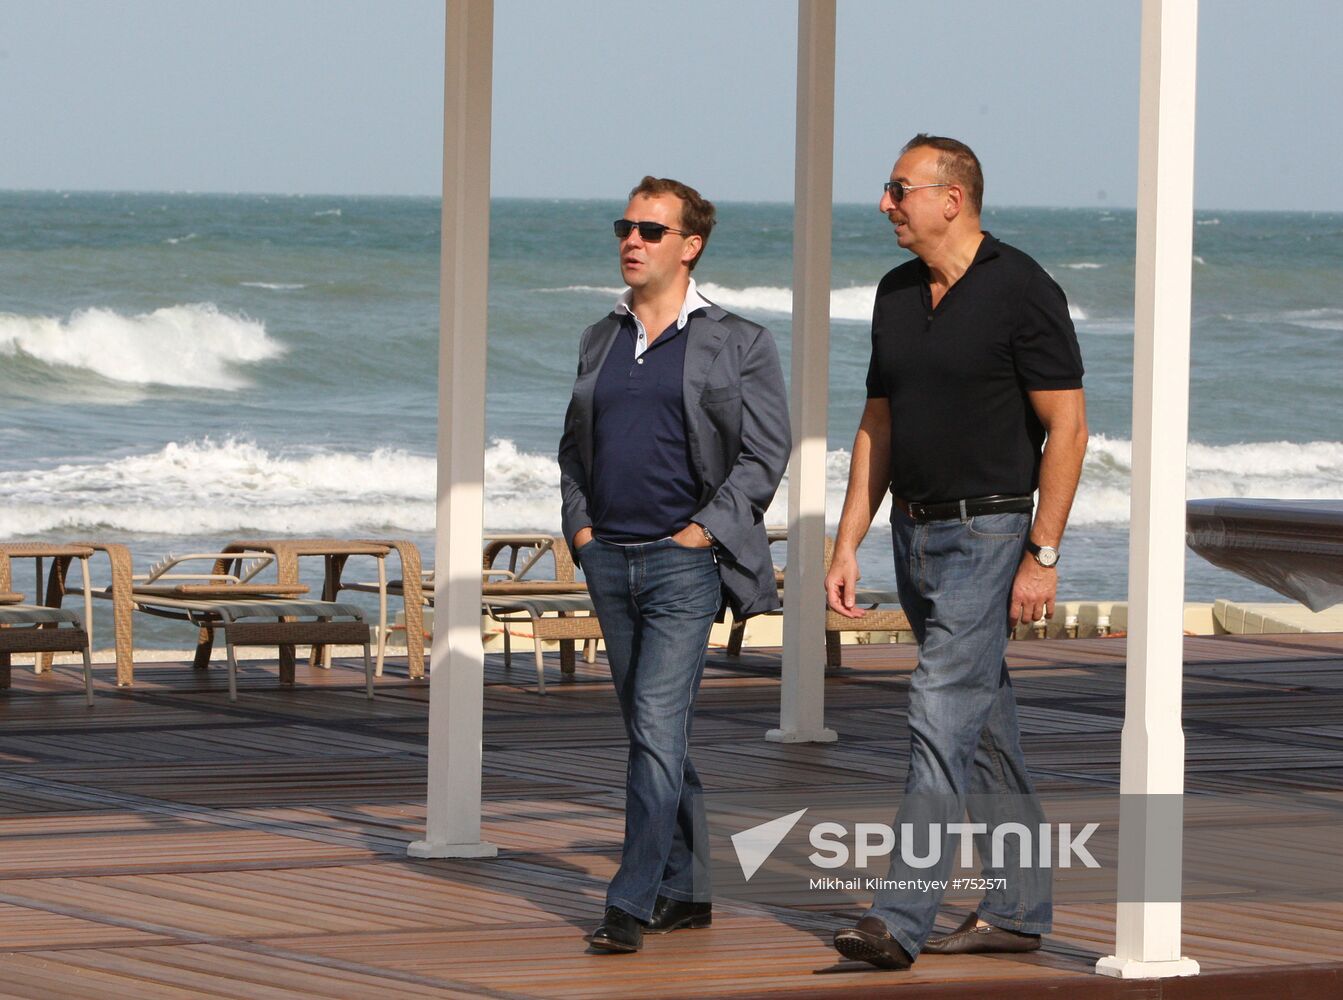 Dmitry Medvedev's official visit to Azerbaijan. Day Two